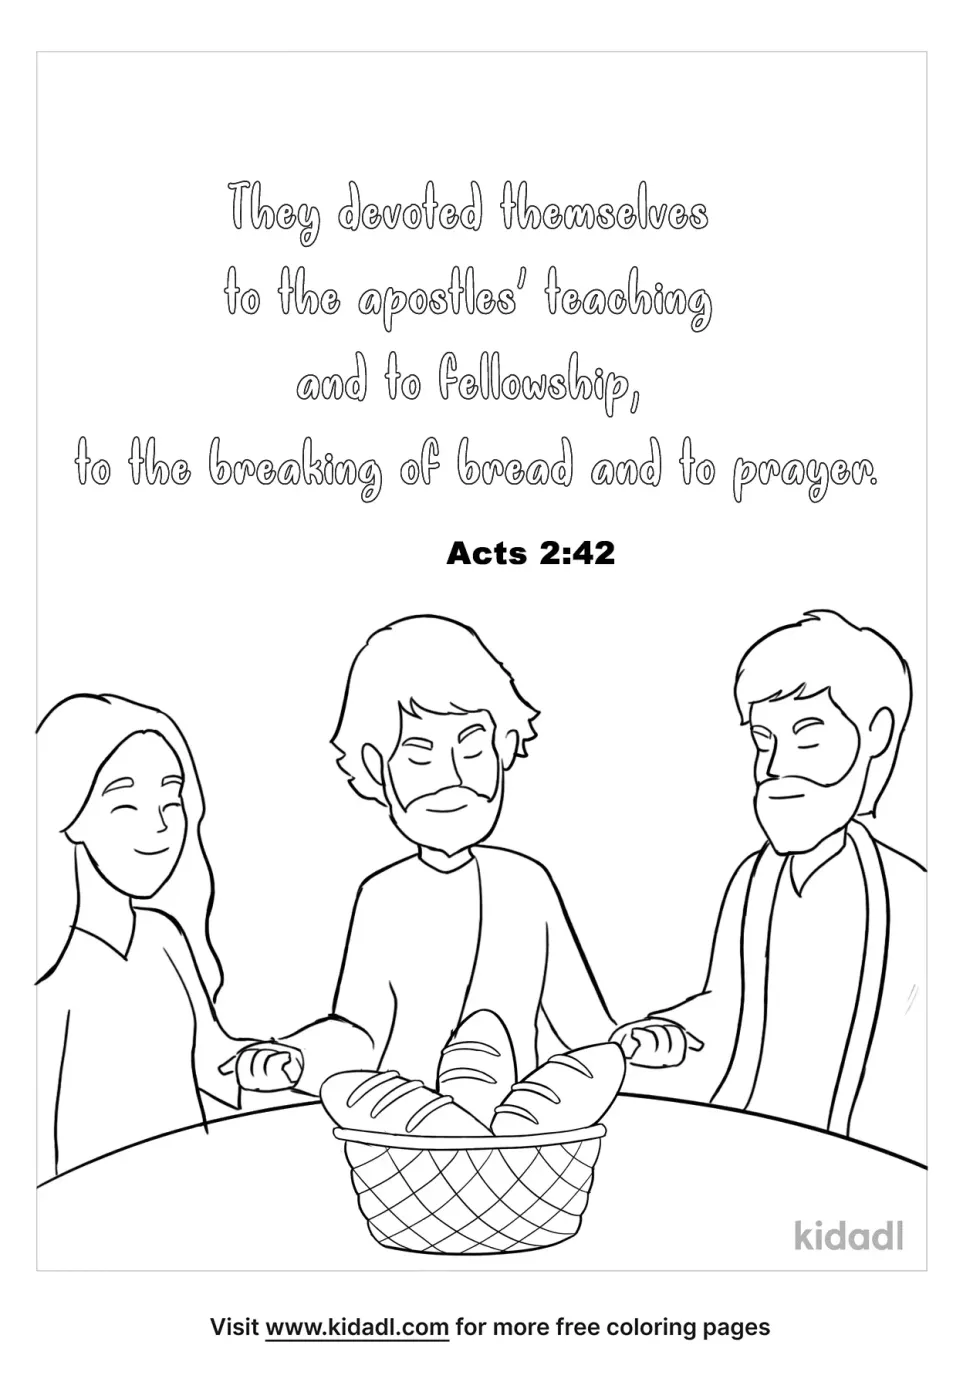 Acts 2:42 Coloring Page